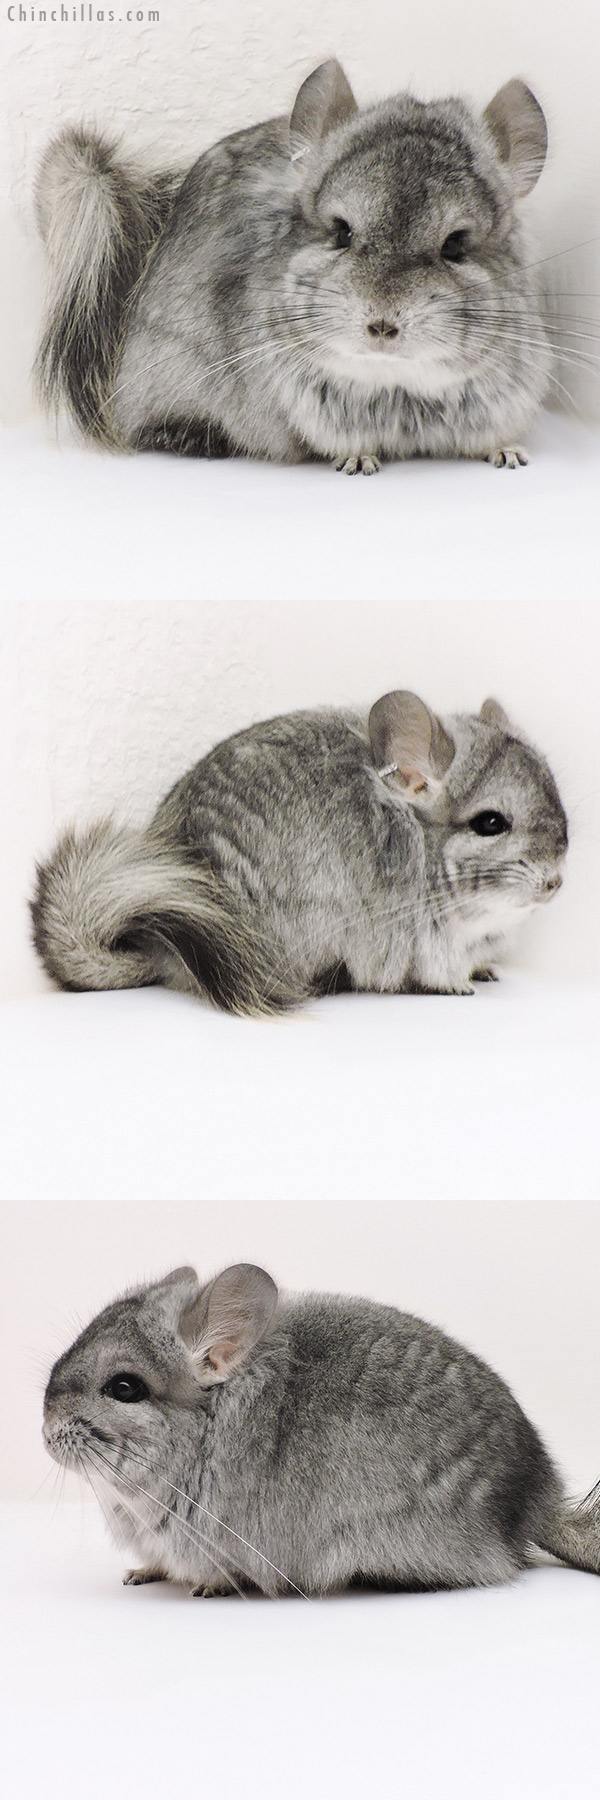 Chinchilla or related item offered for sale or export on Chinchillas.com - 17141 Standard  Royal Persian Angora Male Chinchilla with Lion Mane